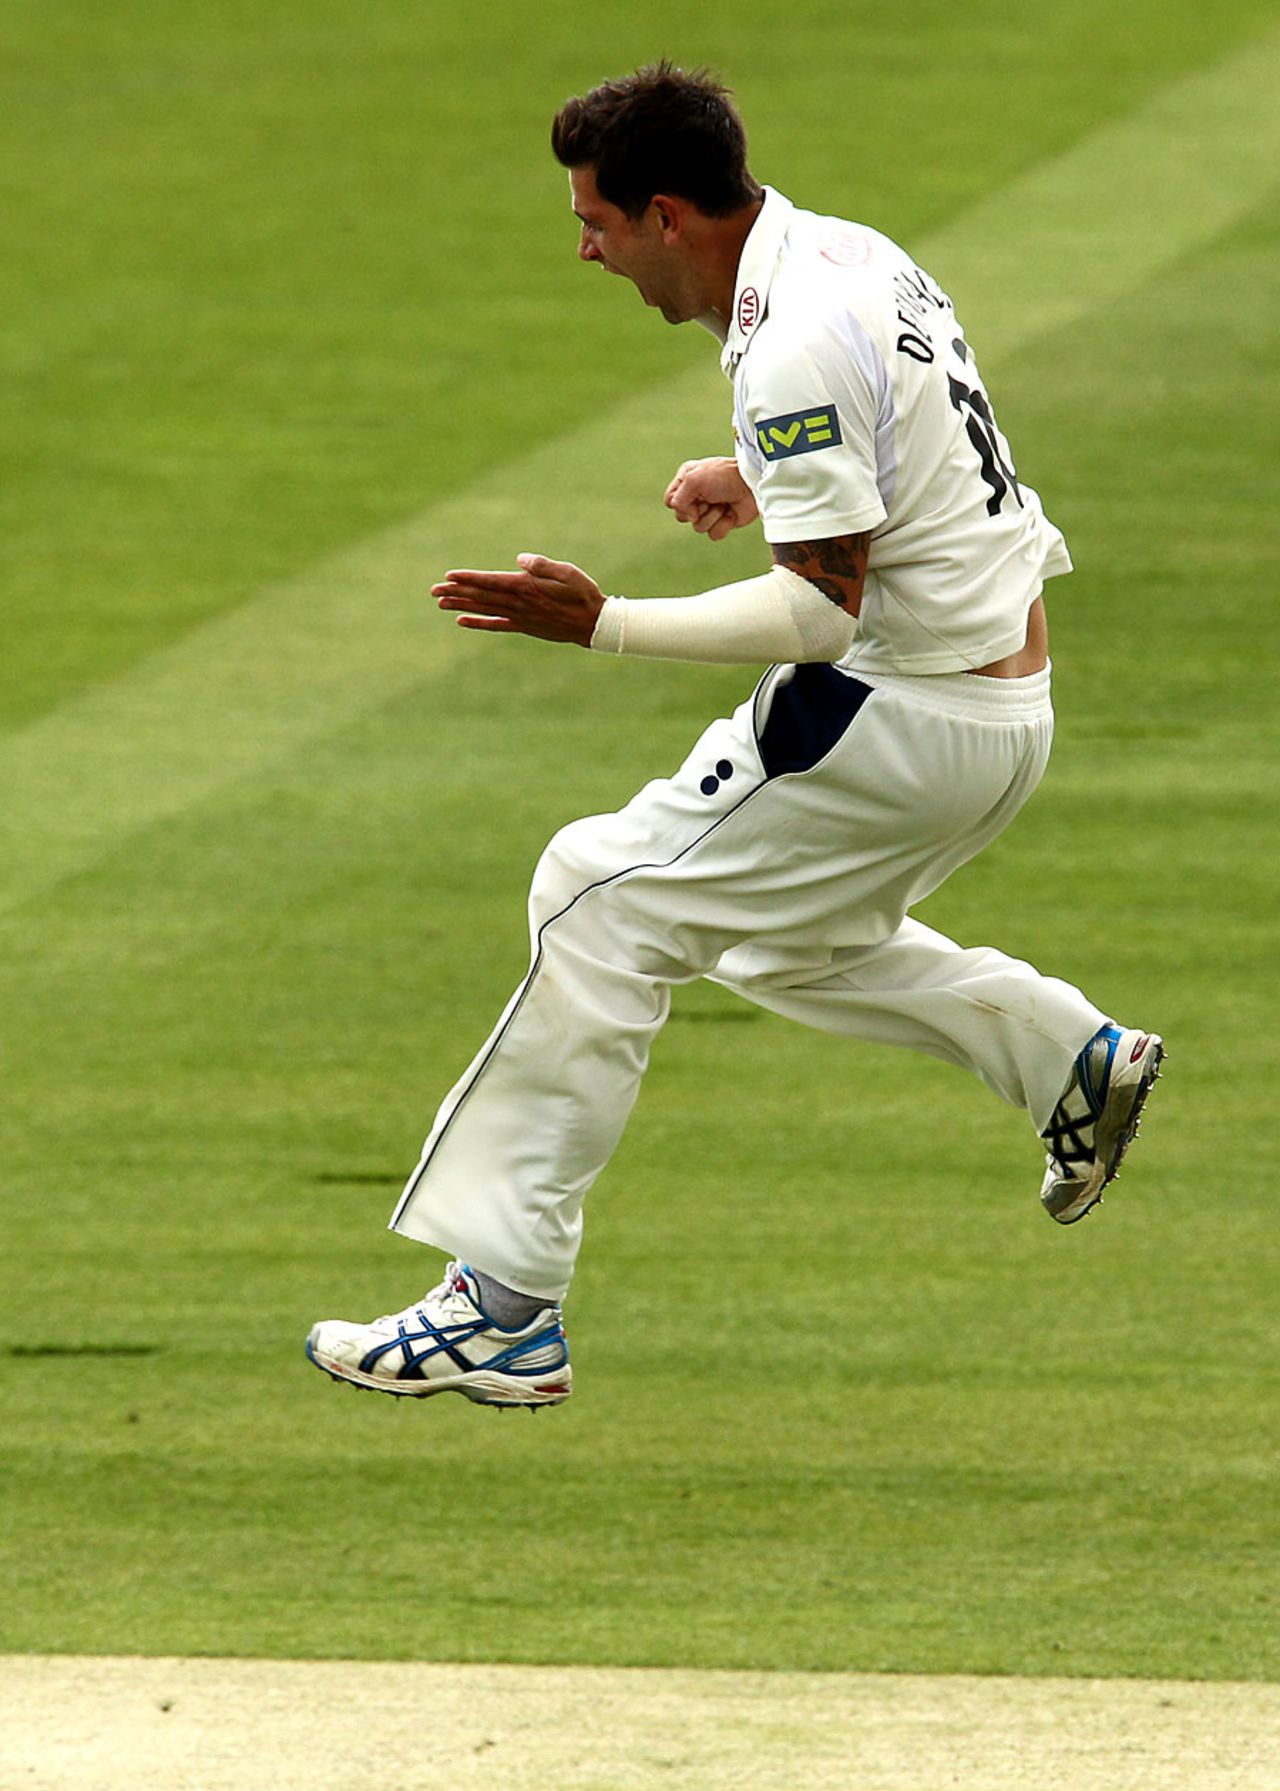 Jade Dernbach celebrates removing Chris Rogers, Middlesex v Surrey, County Championship, Division One, Lord's, April 12, 2012